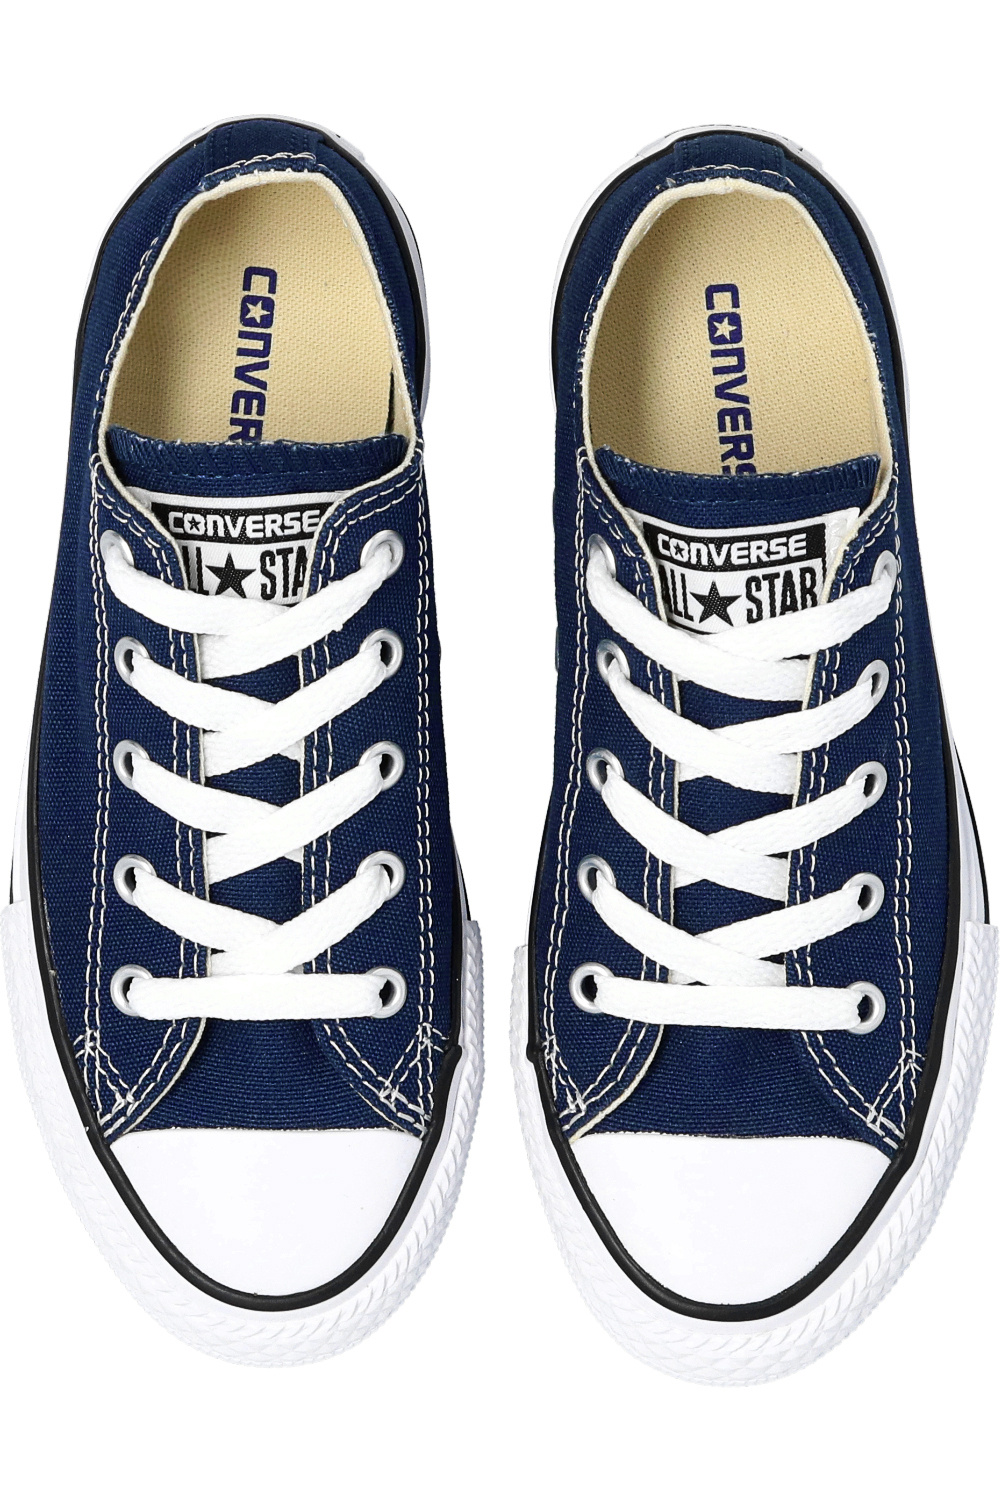 converse attitude Kids Sneakers with logo